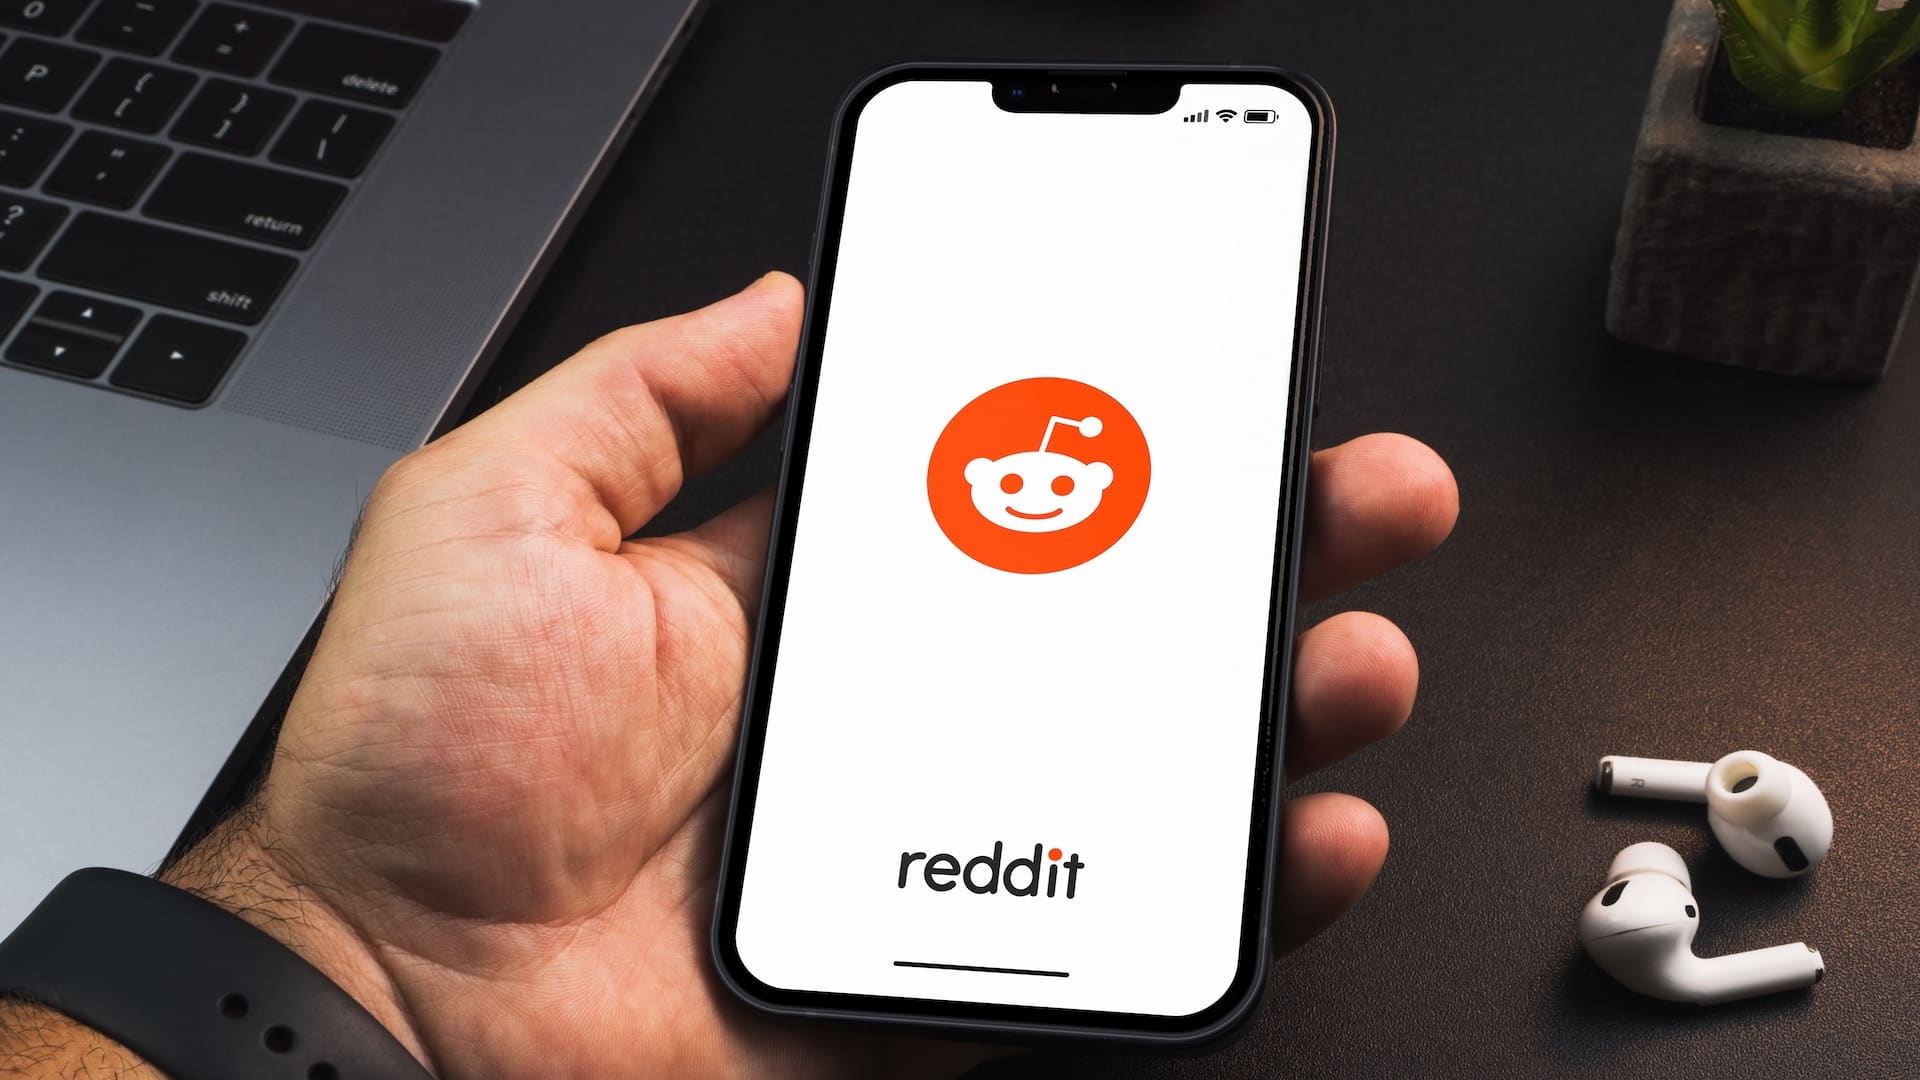 Reddit is removing the ability to opt-out of ad personalization